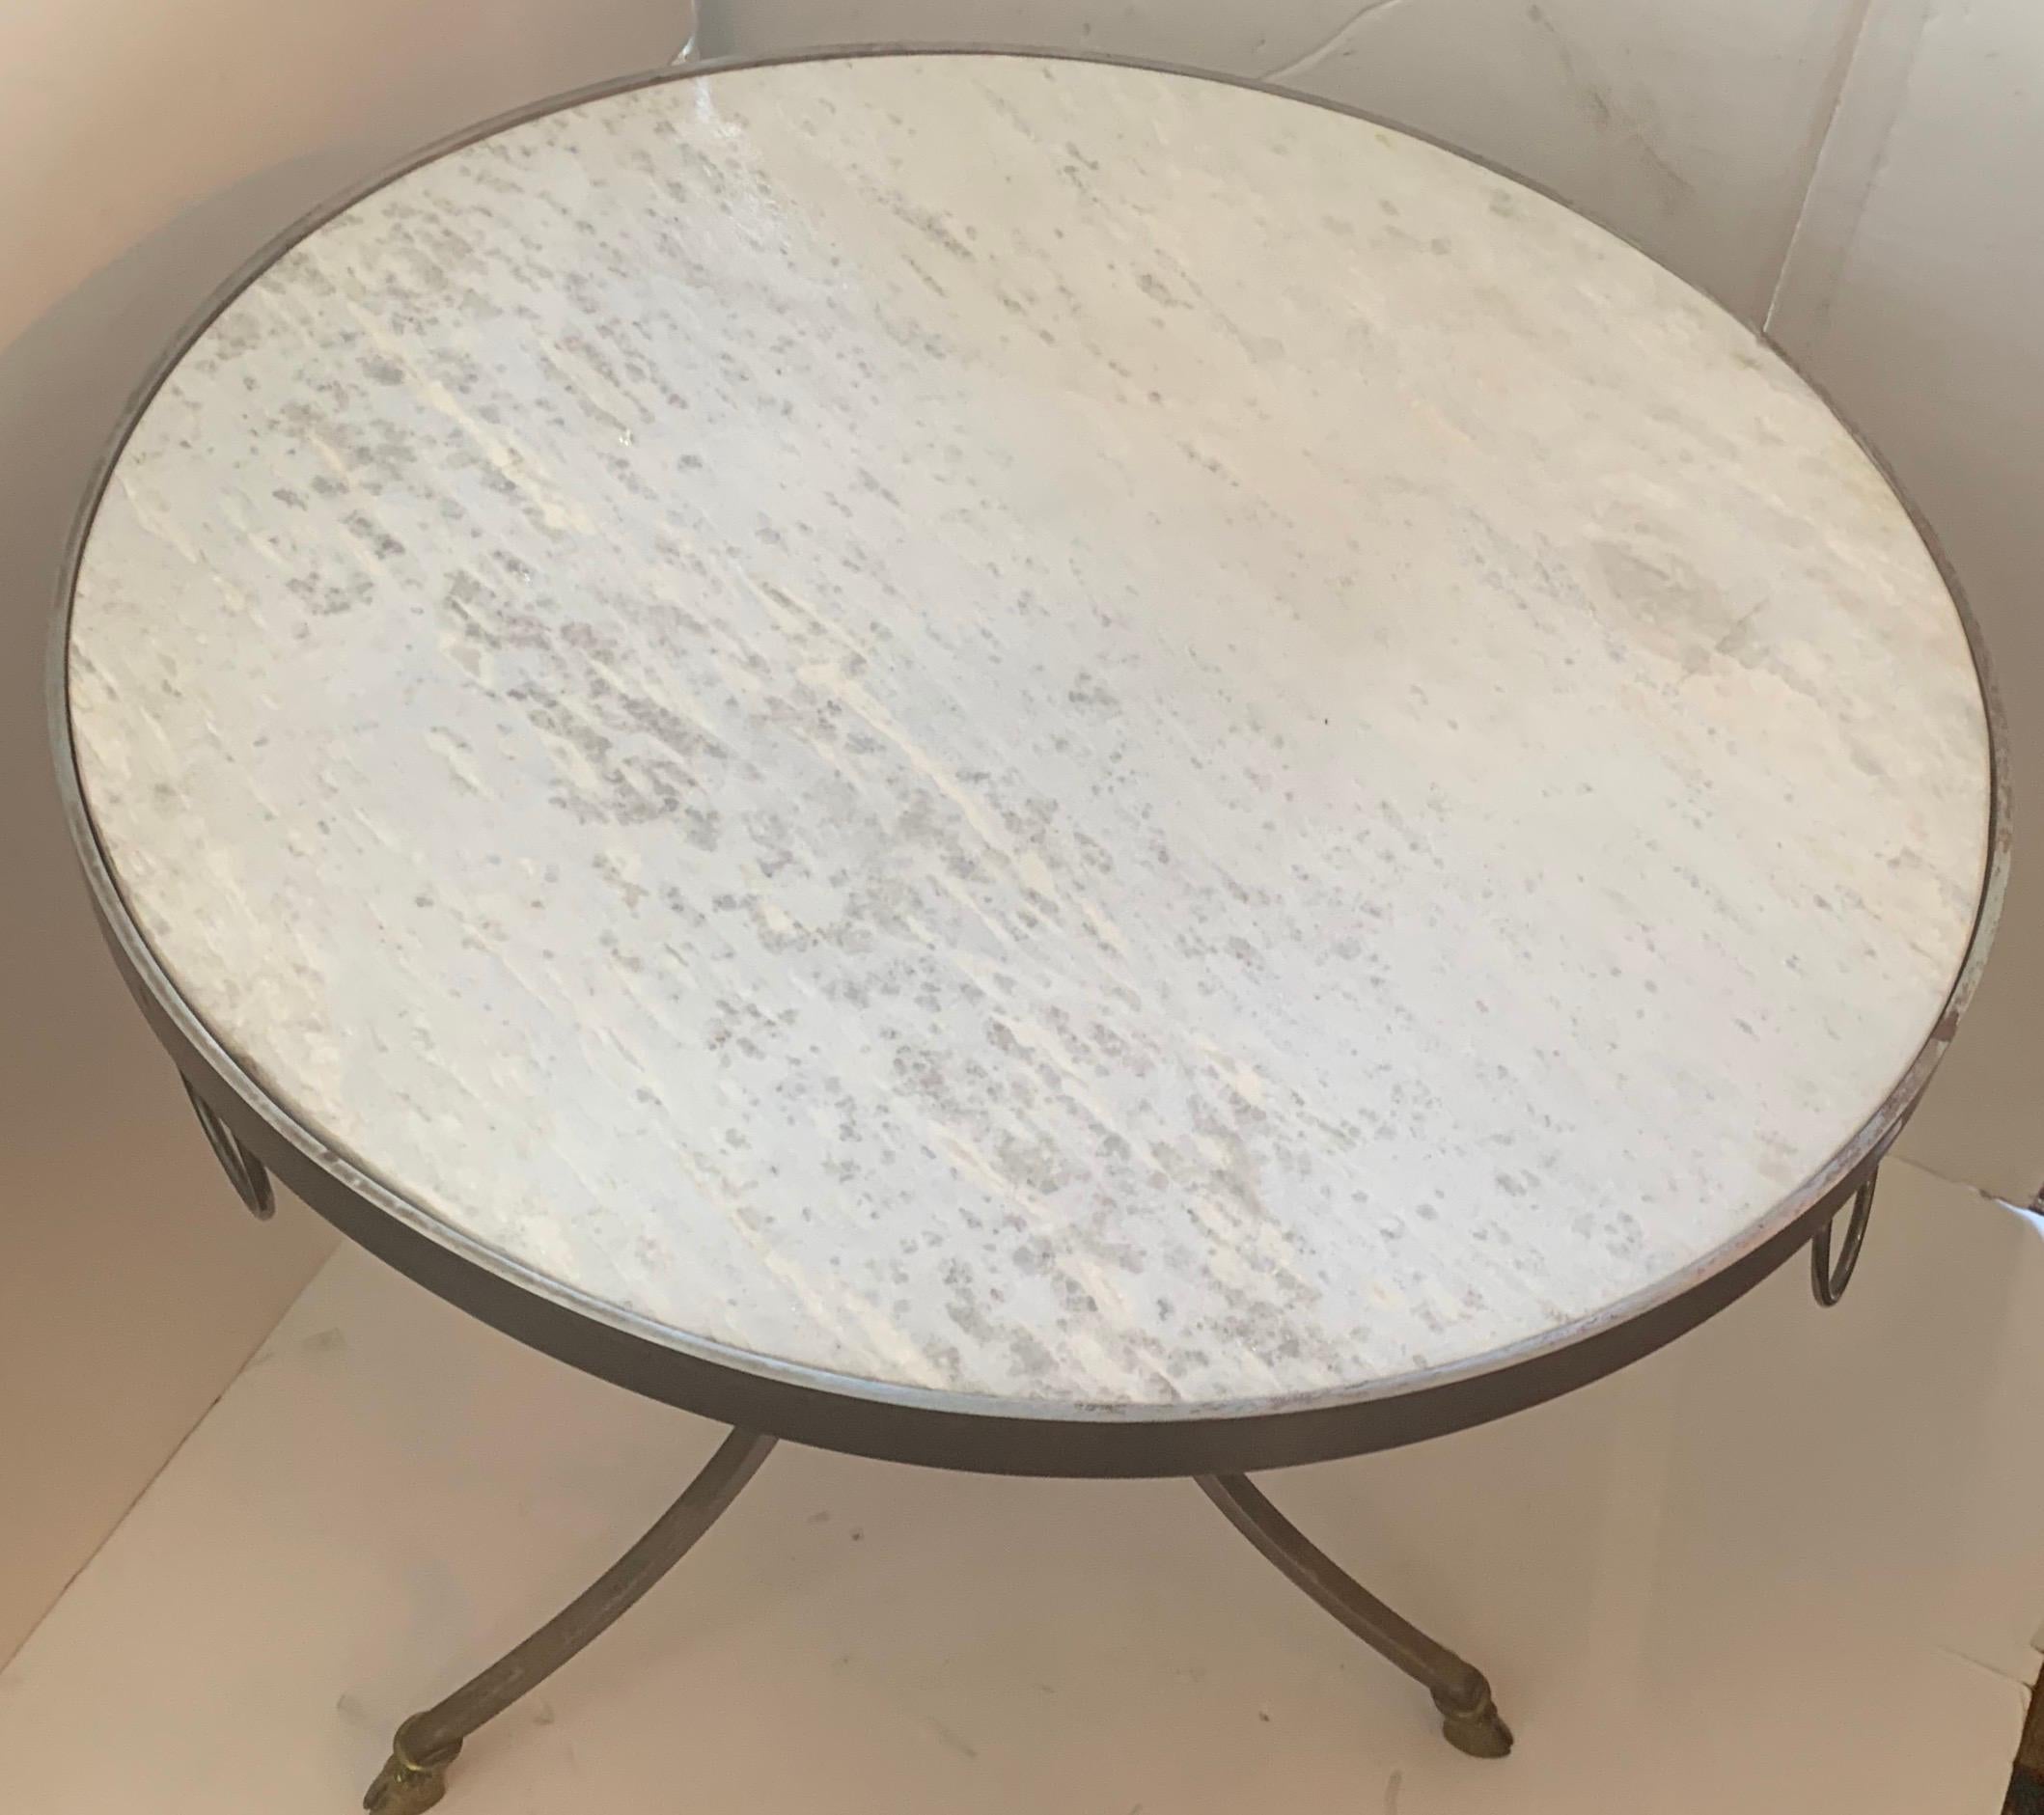 A wonderful Directoire French Louis XVI neoclassical Maison Jansen style guéridon marble-top table with brushed nickel / stainless steel frame and bronze rings and feet.
       